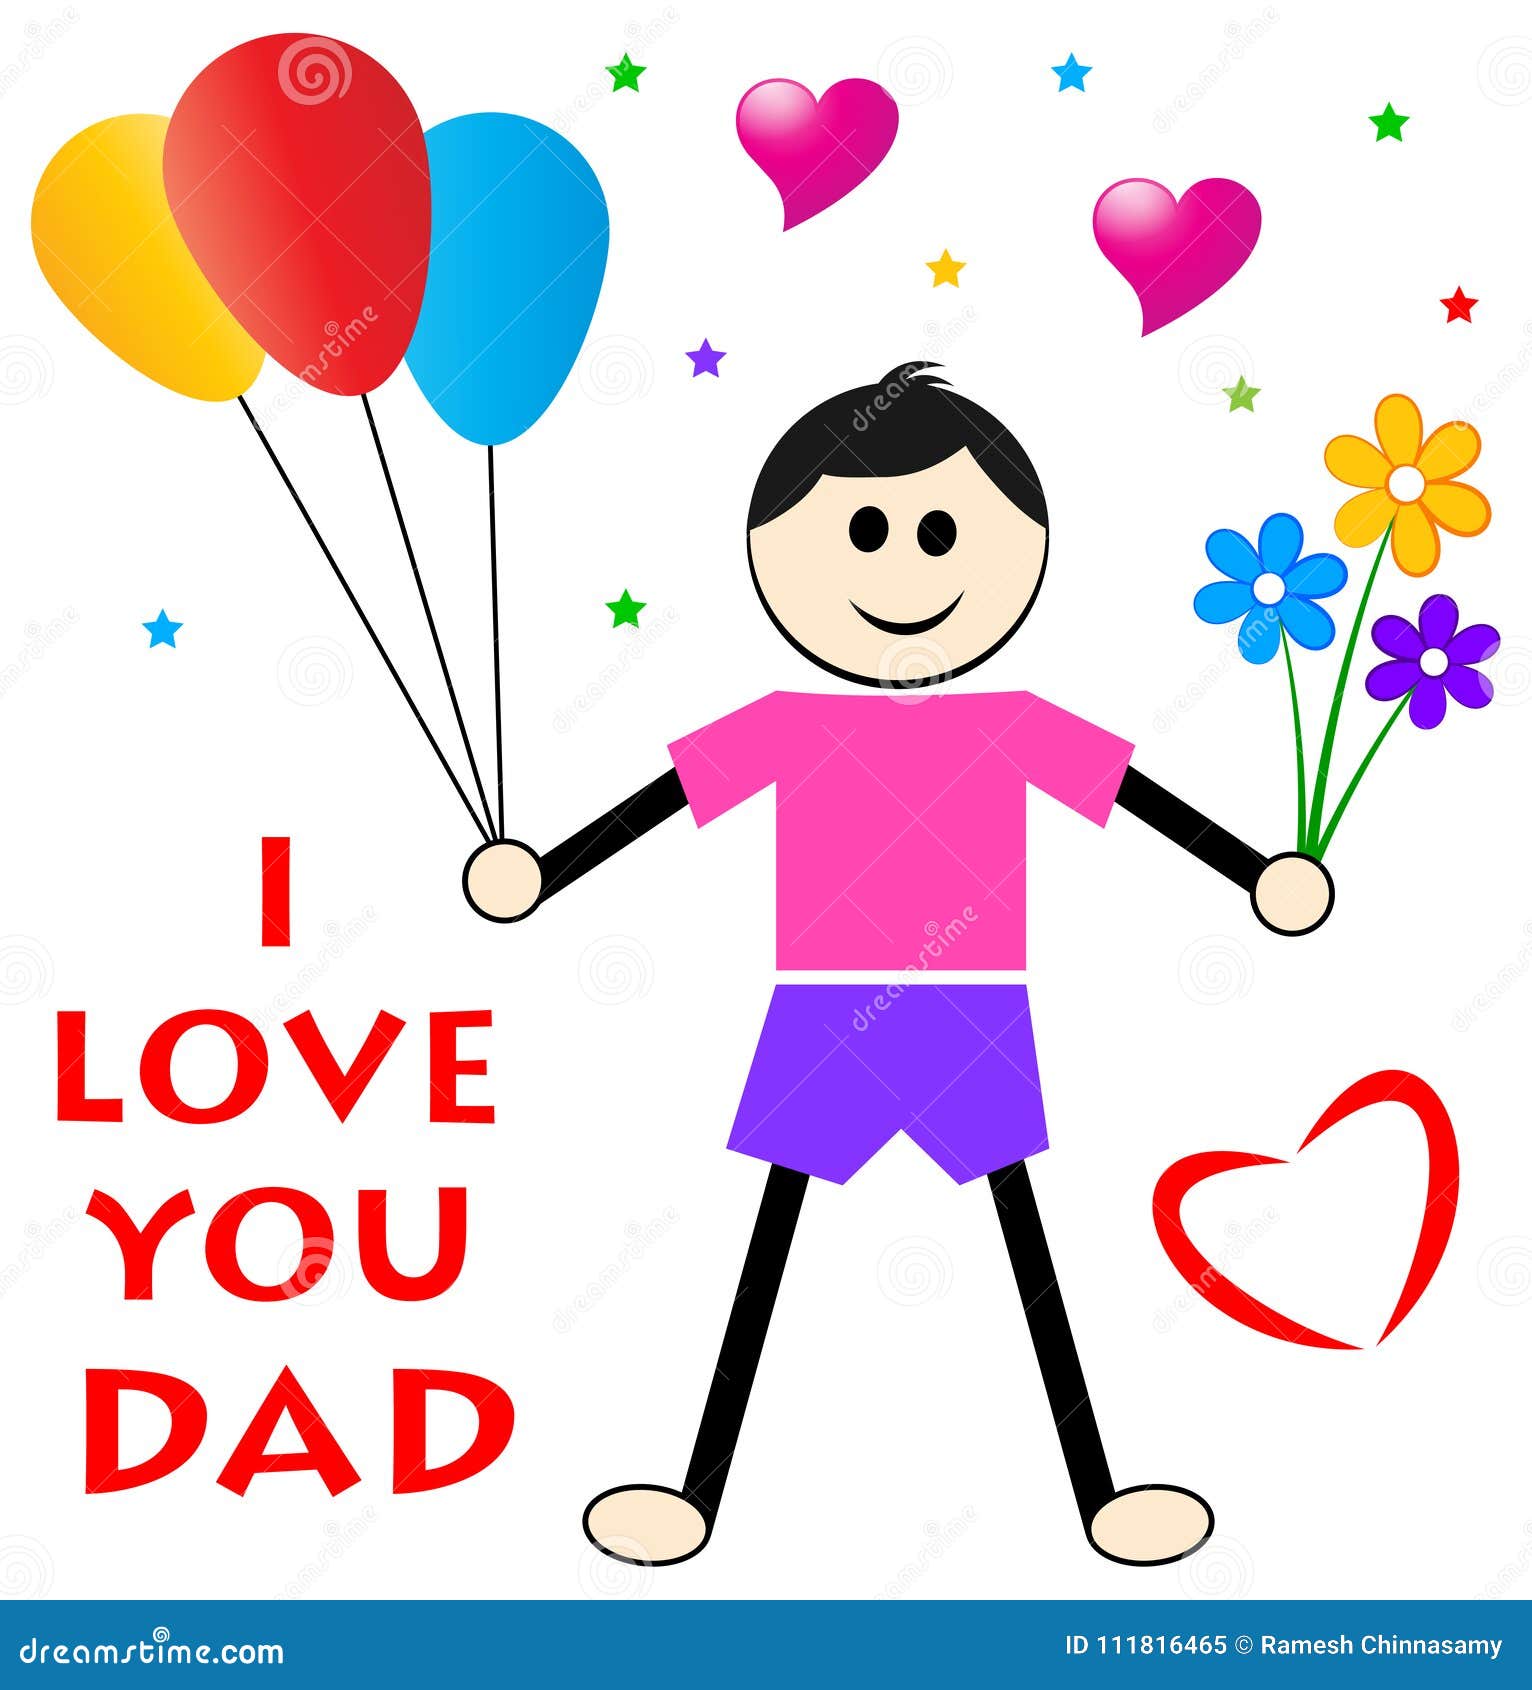 Fathers Day Wishes from Son Stock Vector - Illustration of ...